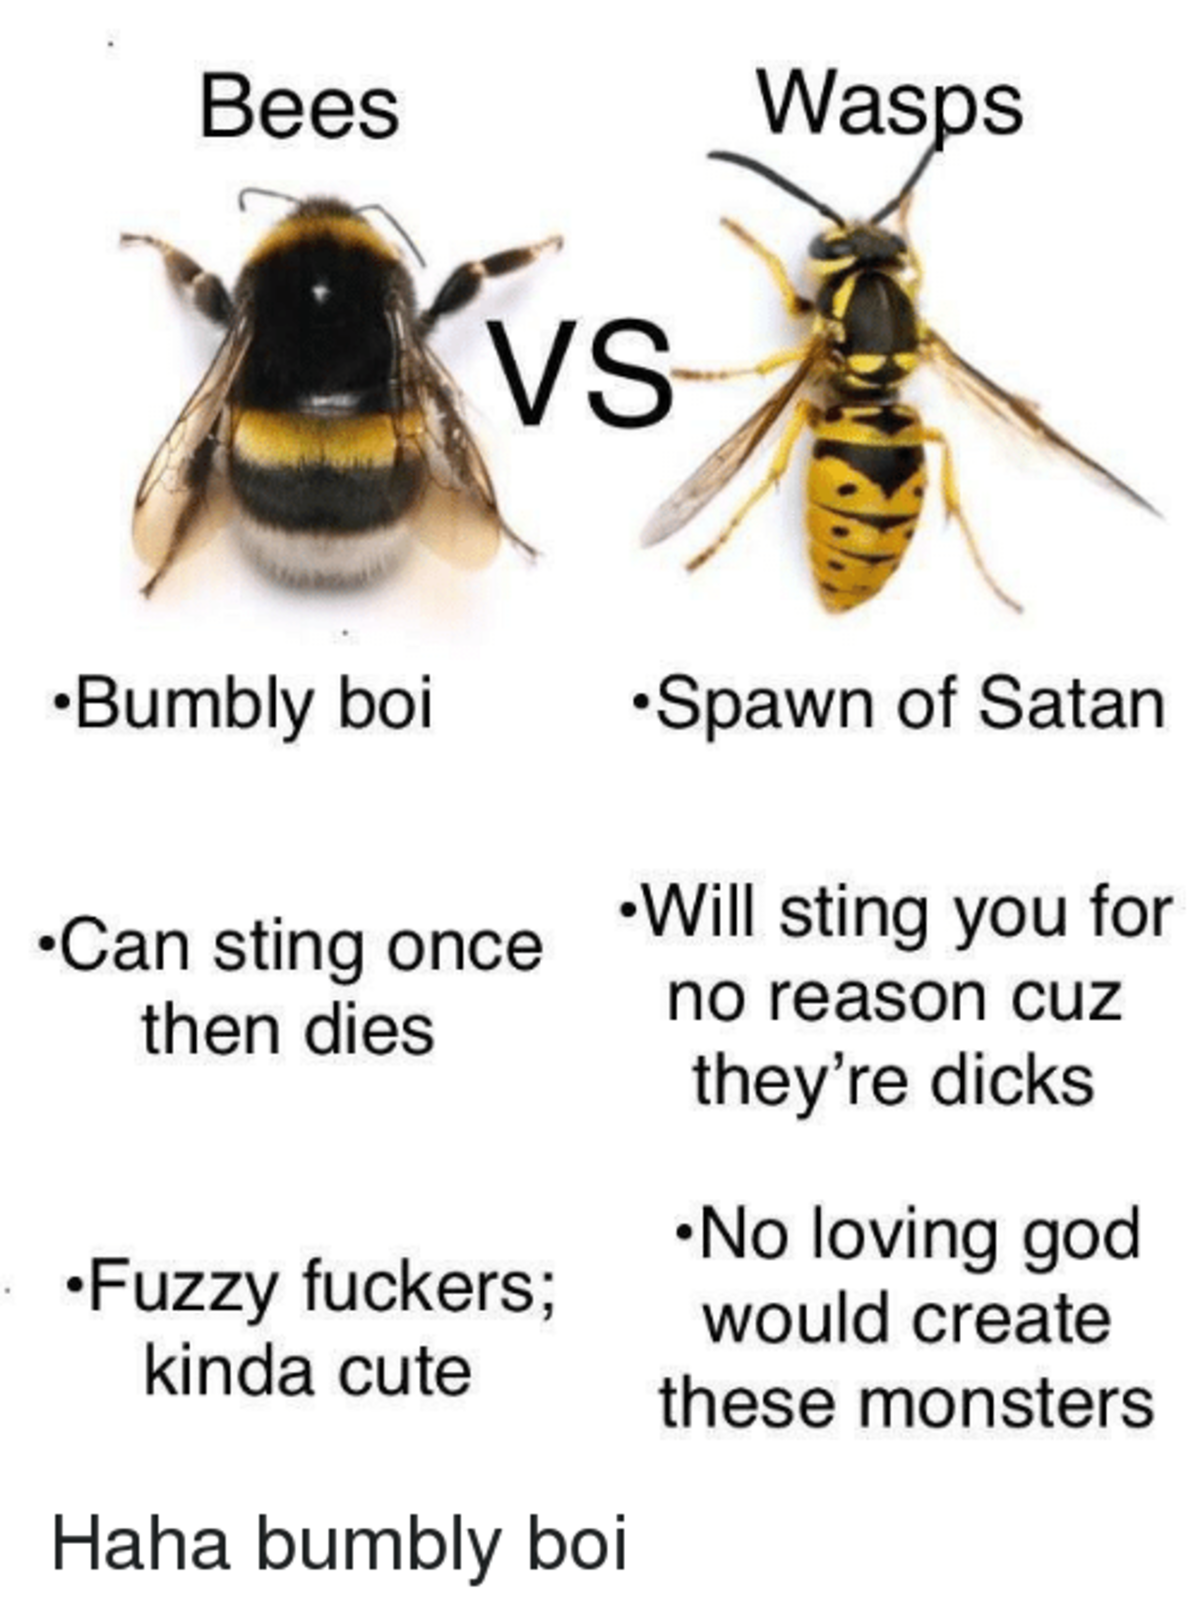 Can bee stings make your dick bigger